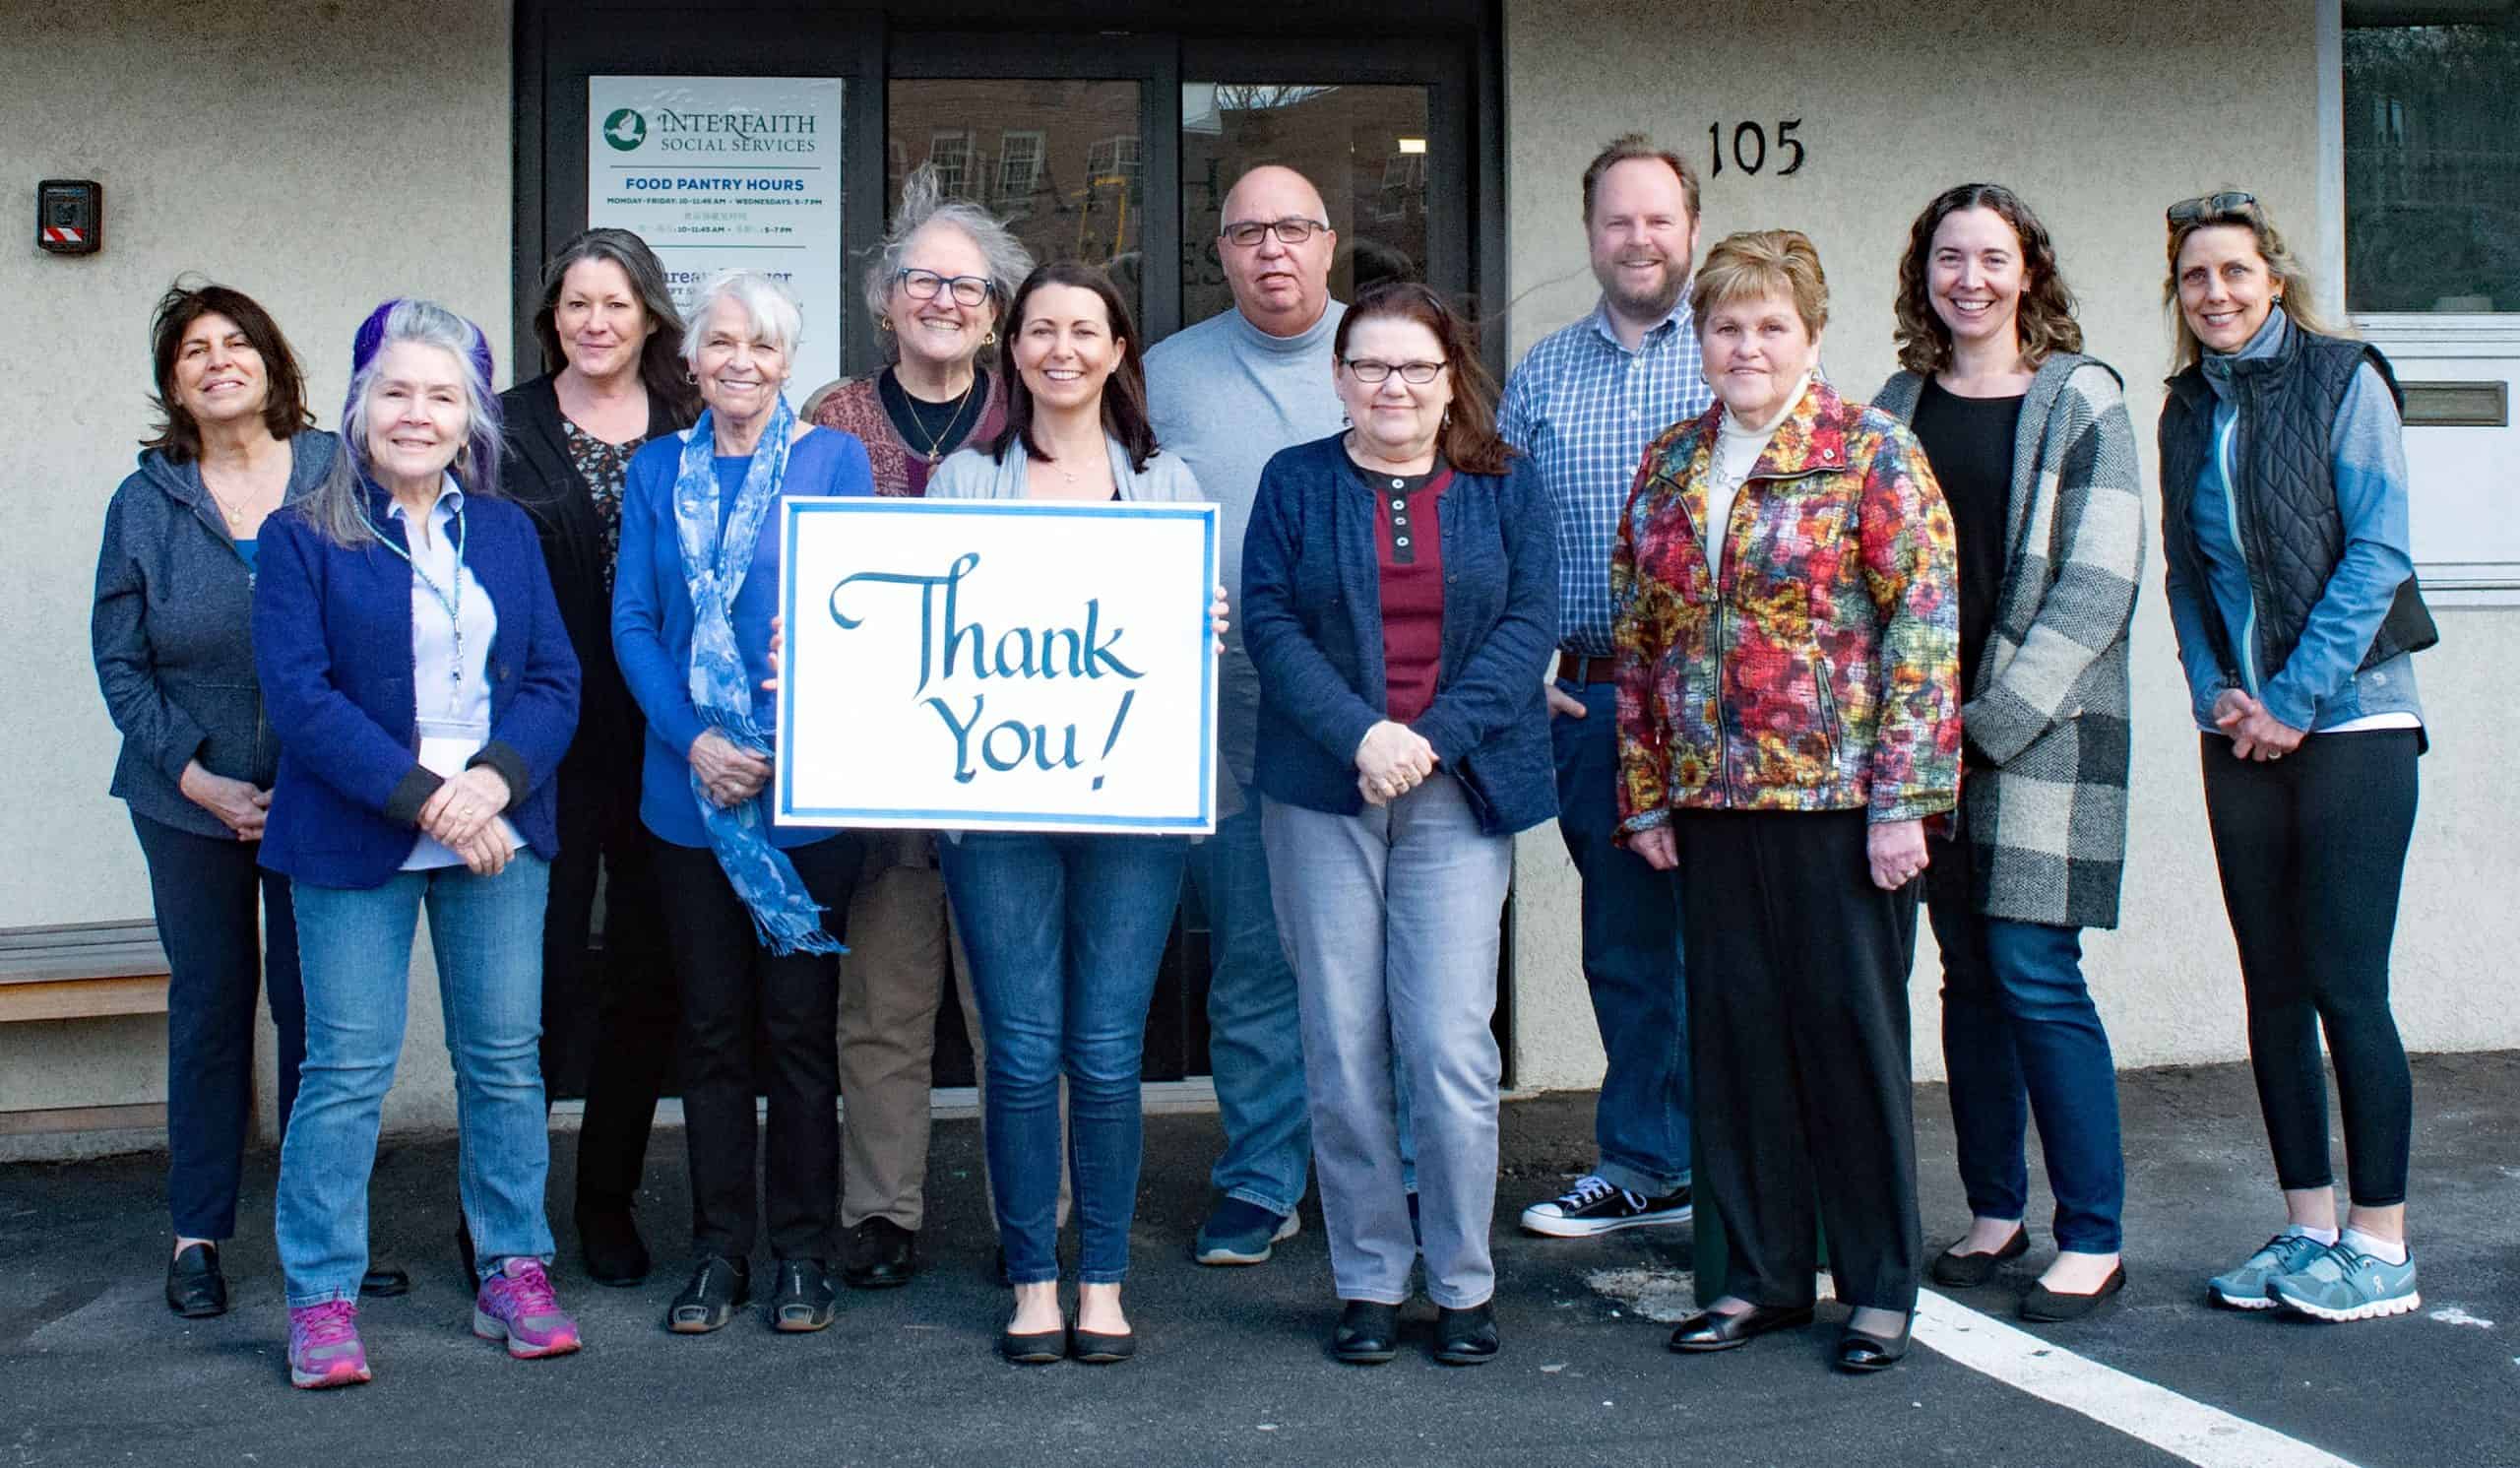 Interfaith Staff holding Thank you sign in front of building